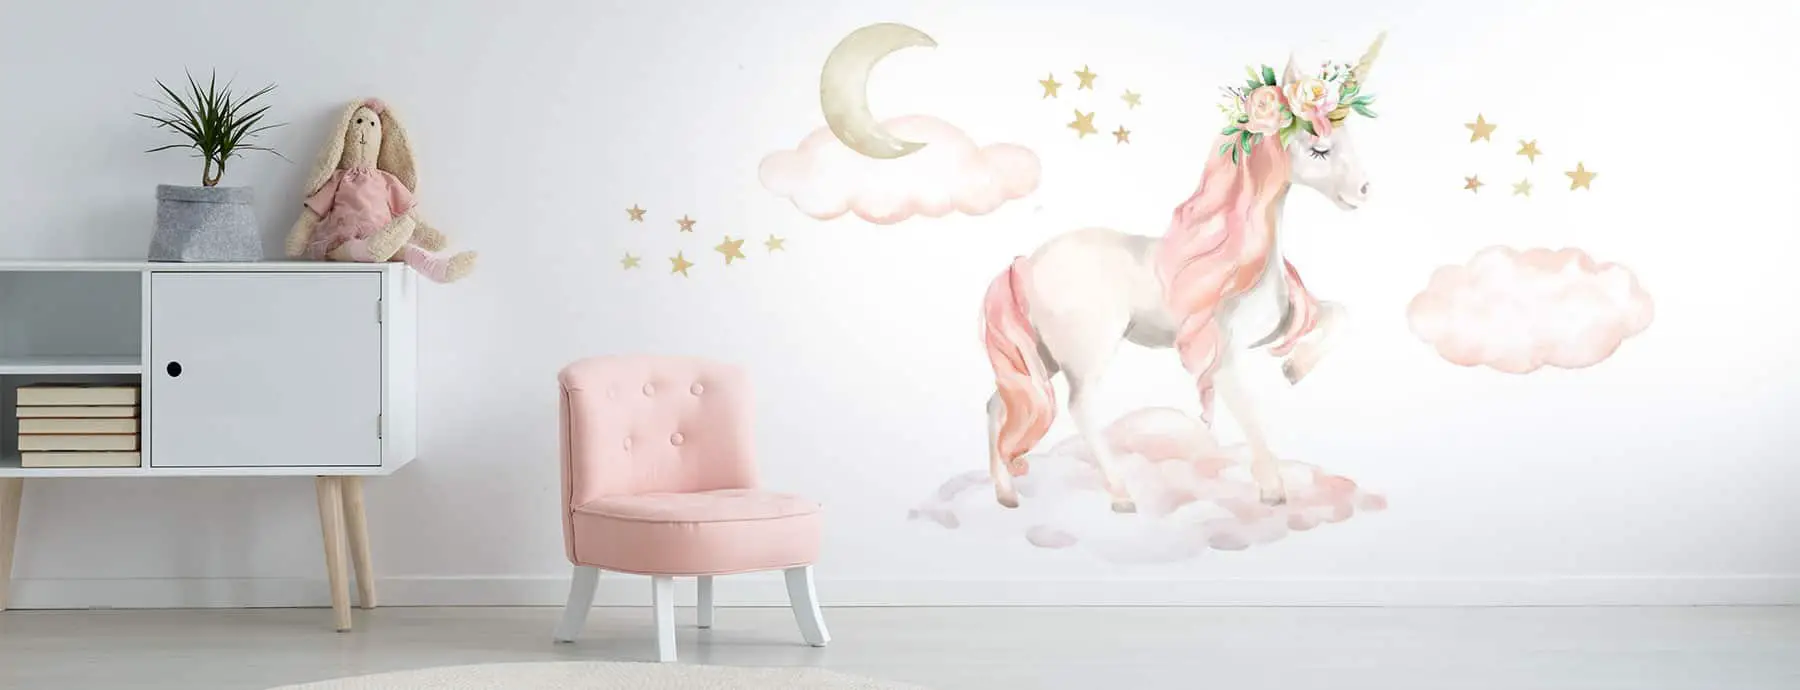 Unicorn Wall Sticker Decor Unicorn DIY Stickers for Baby Girls Kids Bedroom Playroom Party Decoration Accmor Unicorn Wall Decals